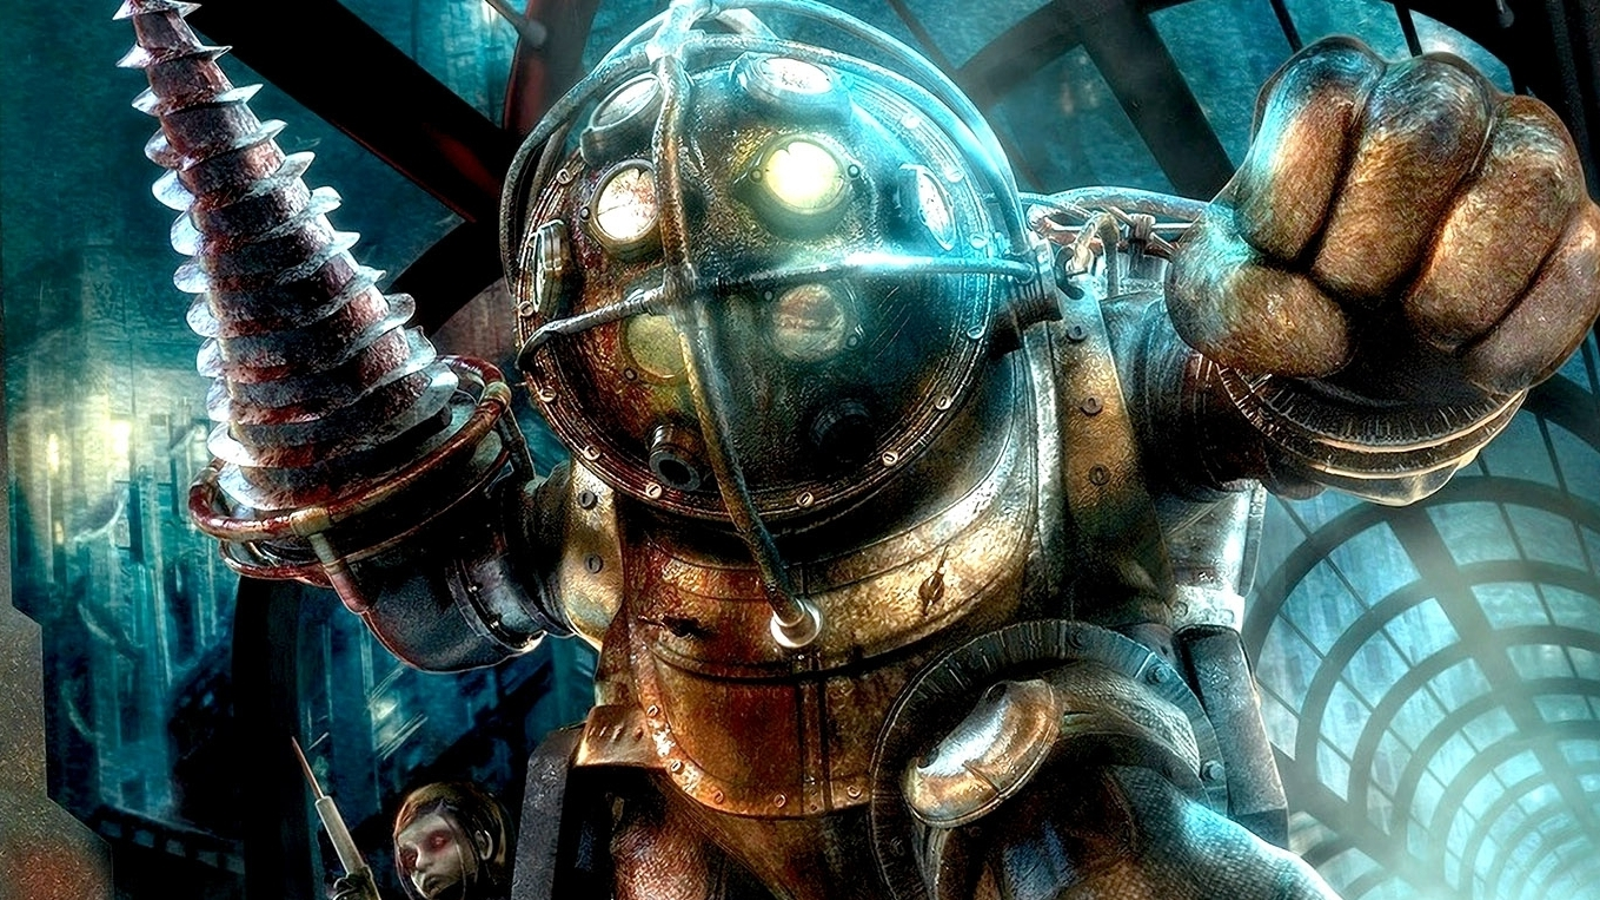 BioShock: The Collection includes all three games and it's heading to PS4,  Xbox One & PC - Daily Star